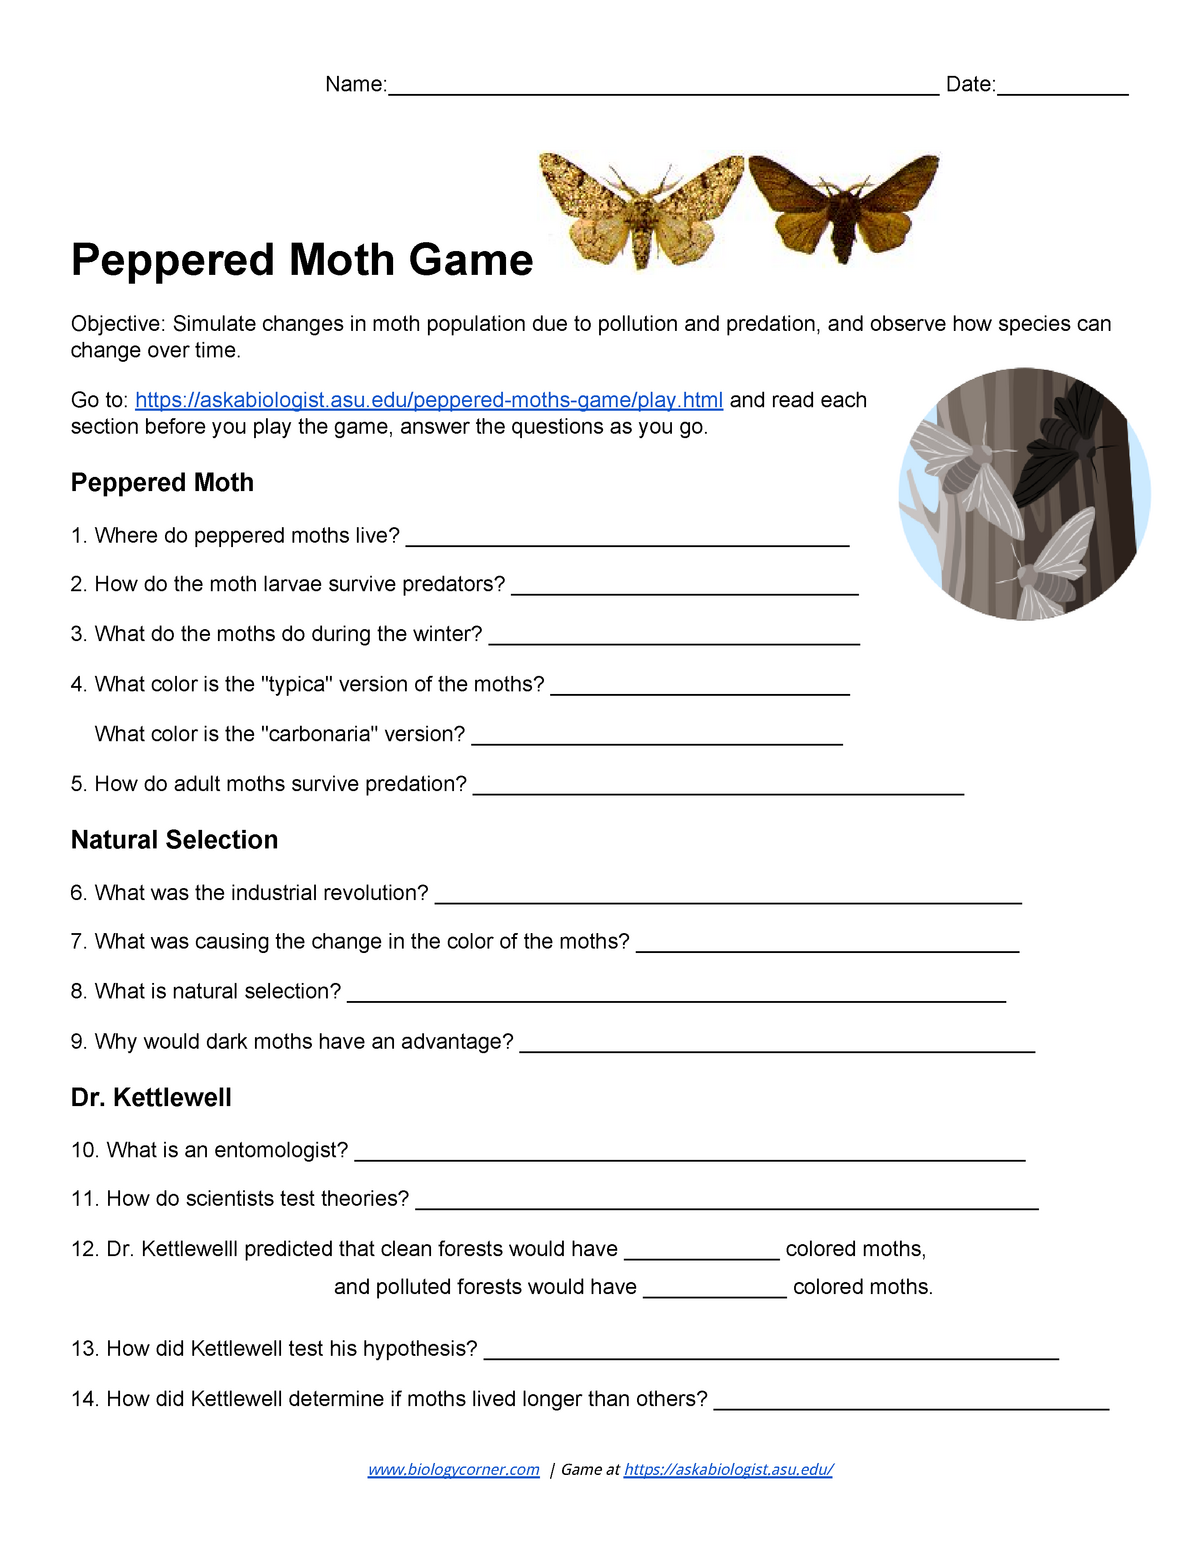 Peppered Moth Game Worksheet Answers